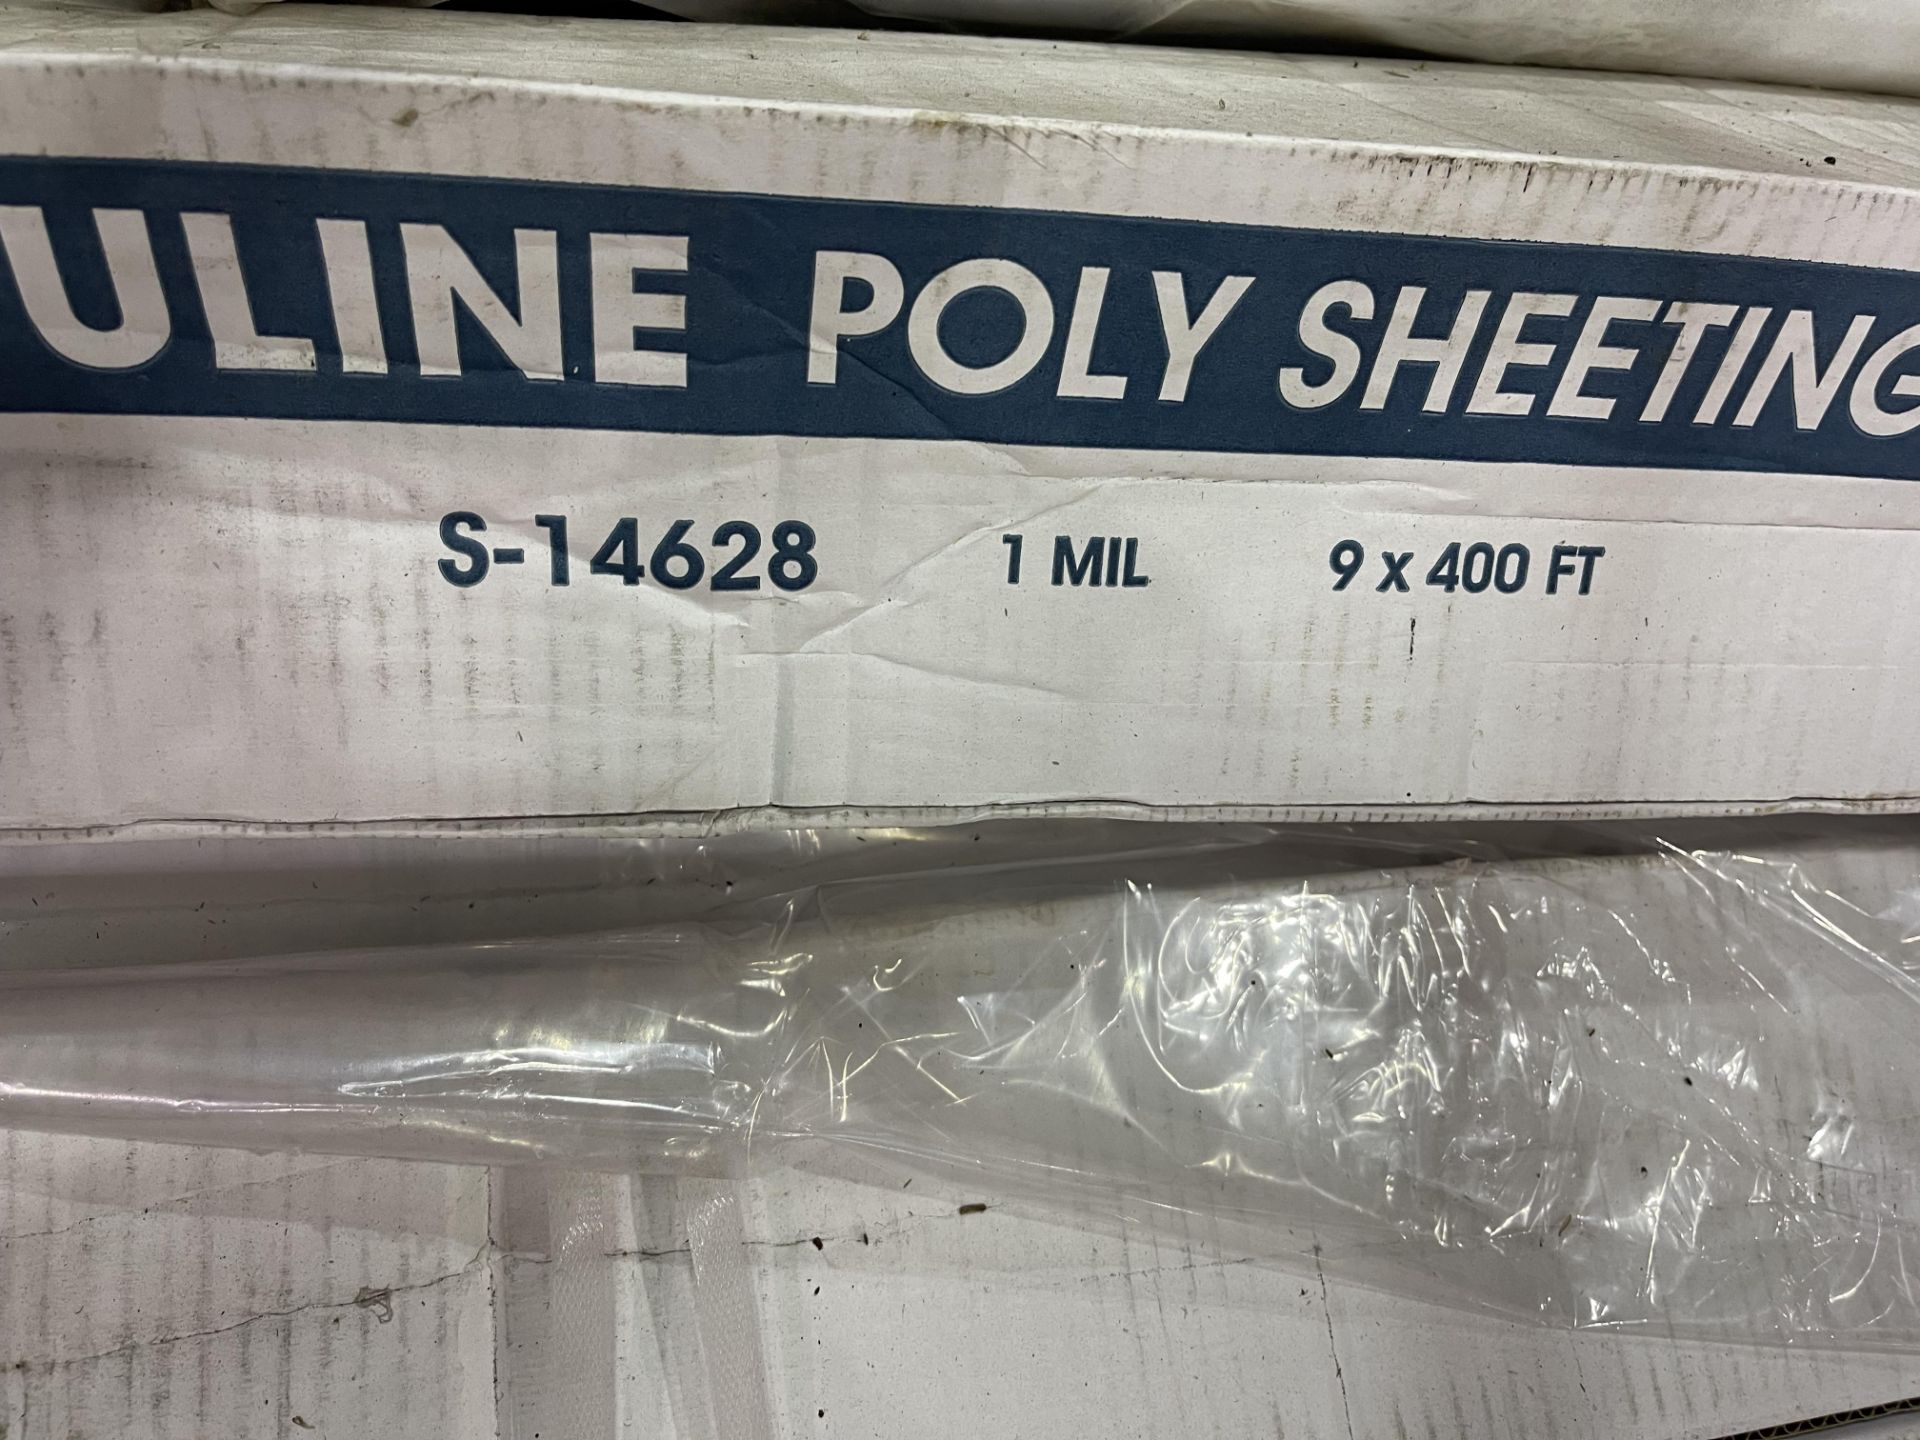 Pallet of Uline Poly Sheeting - Image 2 of 3